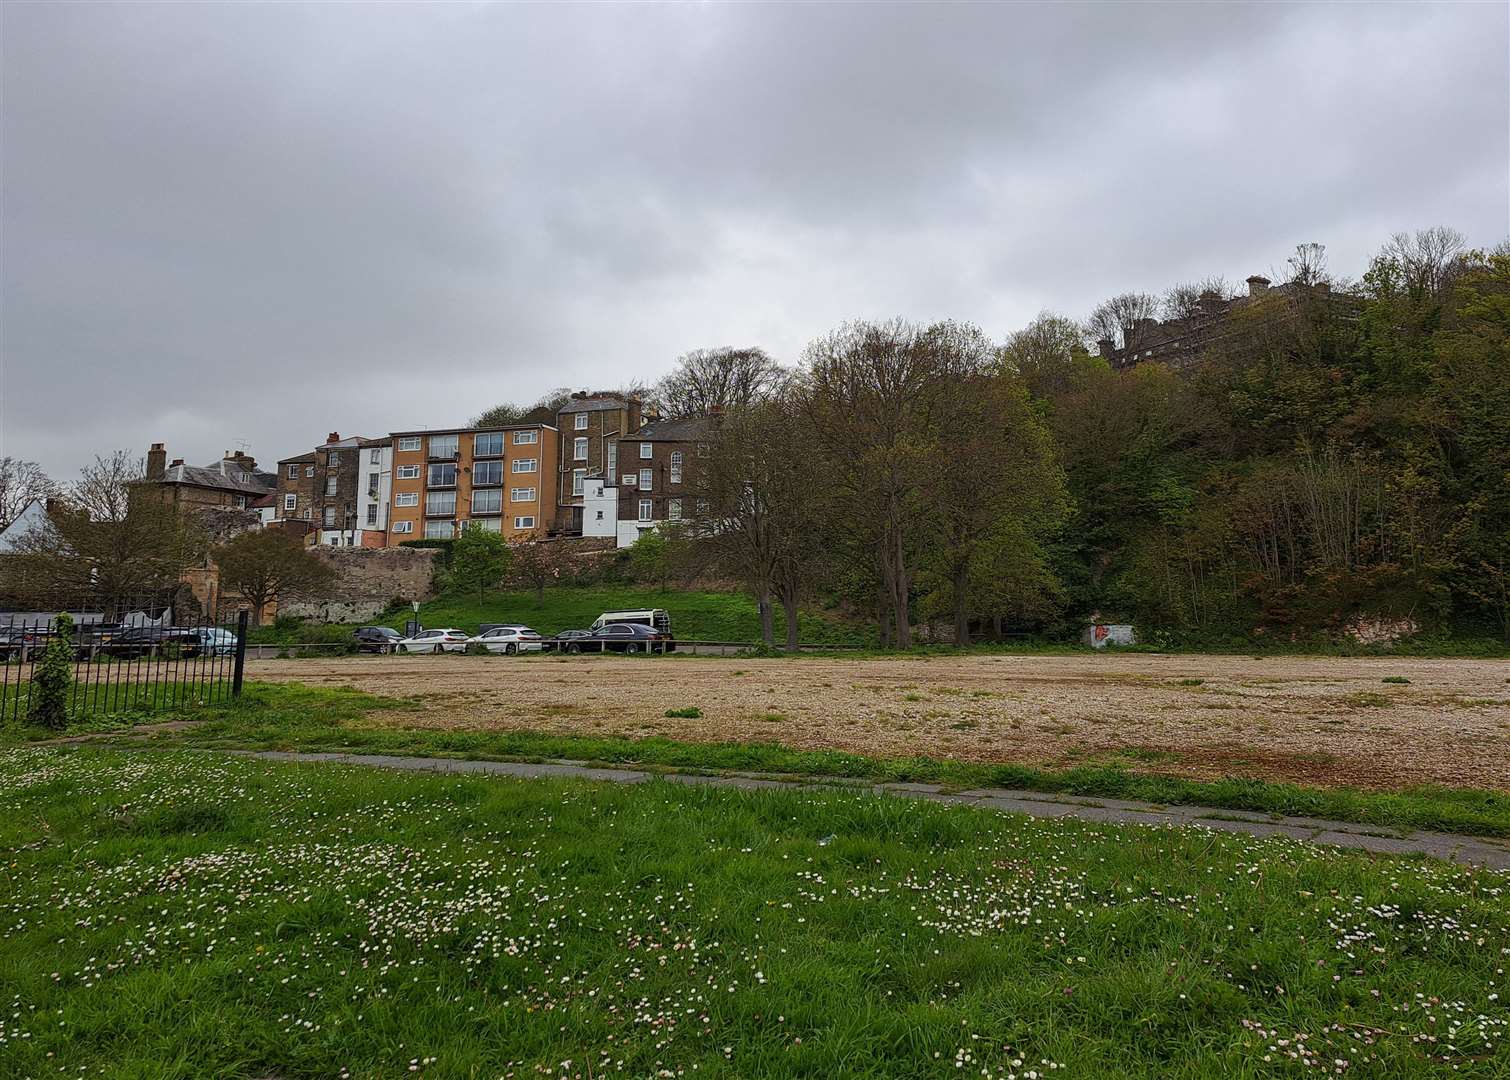 How the former Dover Leisure Centre site currently looks